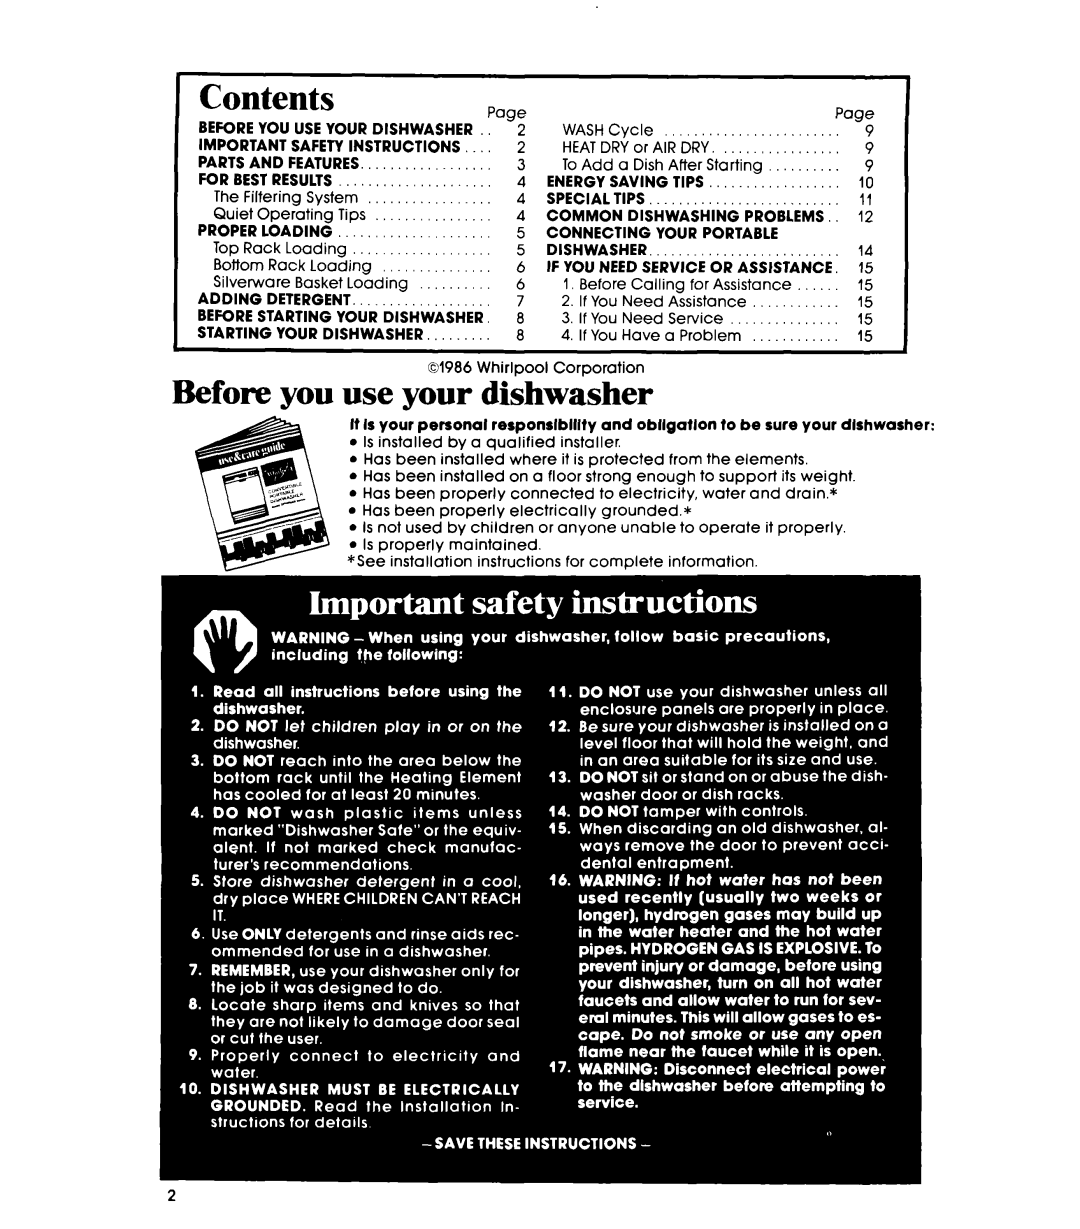 Whirlpool DP1098XR Series manual Contents, Before you use your dishwasher 